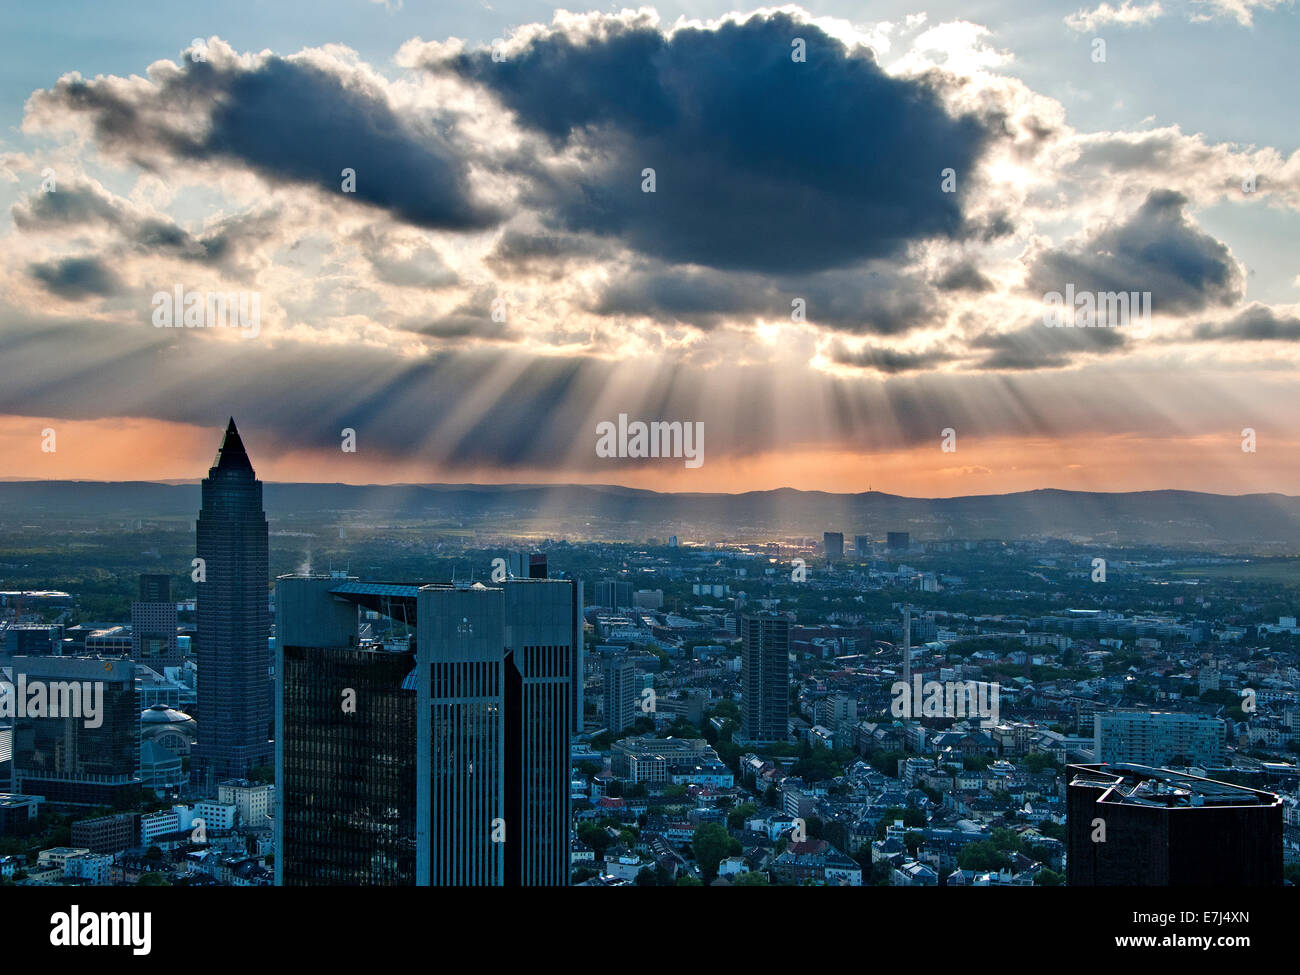 Spectacular View of Frankfurt City from The Main Tower, Frankfurt, Germany, Europe Stock Photo